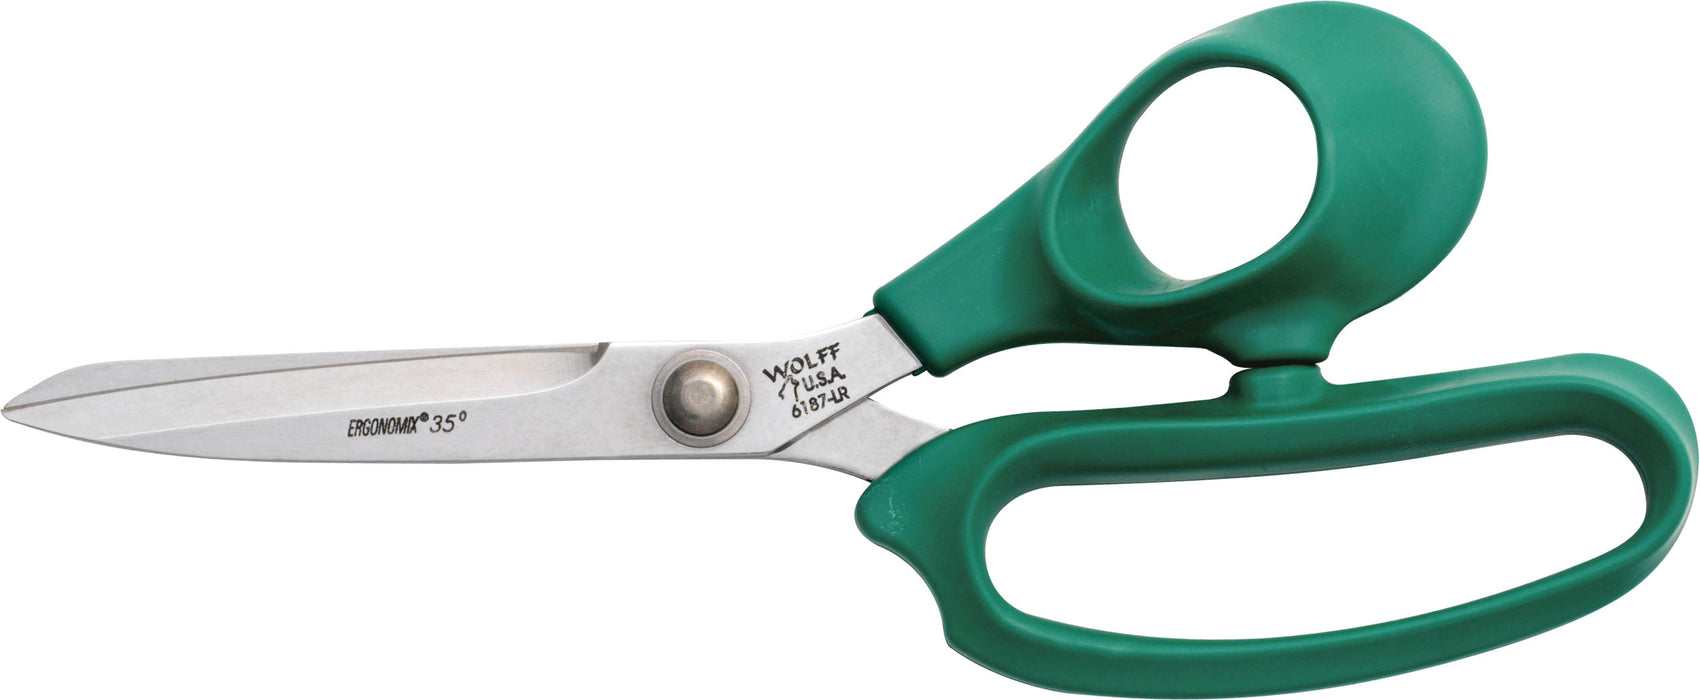 Wolff® 6187-LR 9" Ergonomix® Poultry Scissors - 6000 Series Stainless Steel Shears